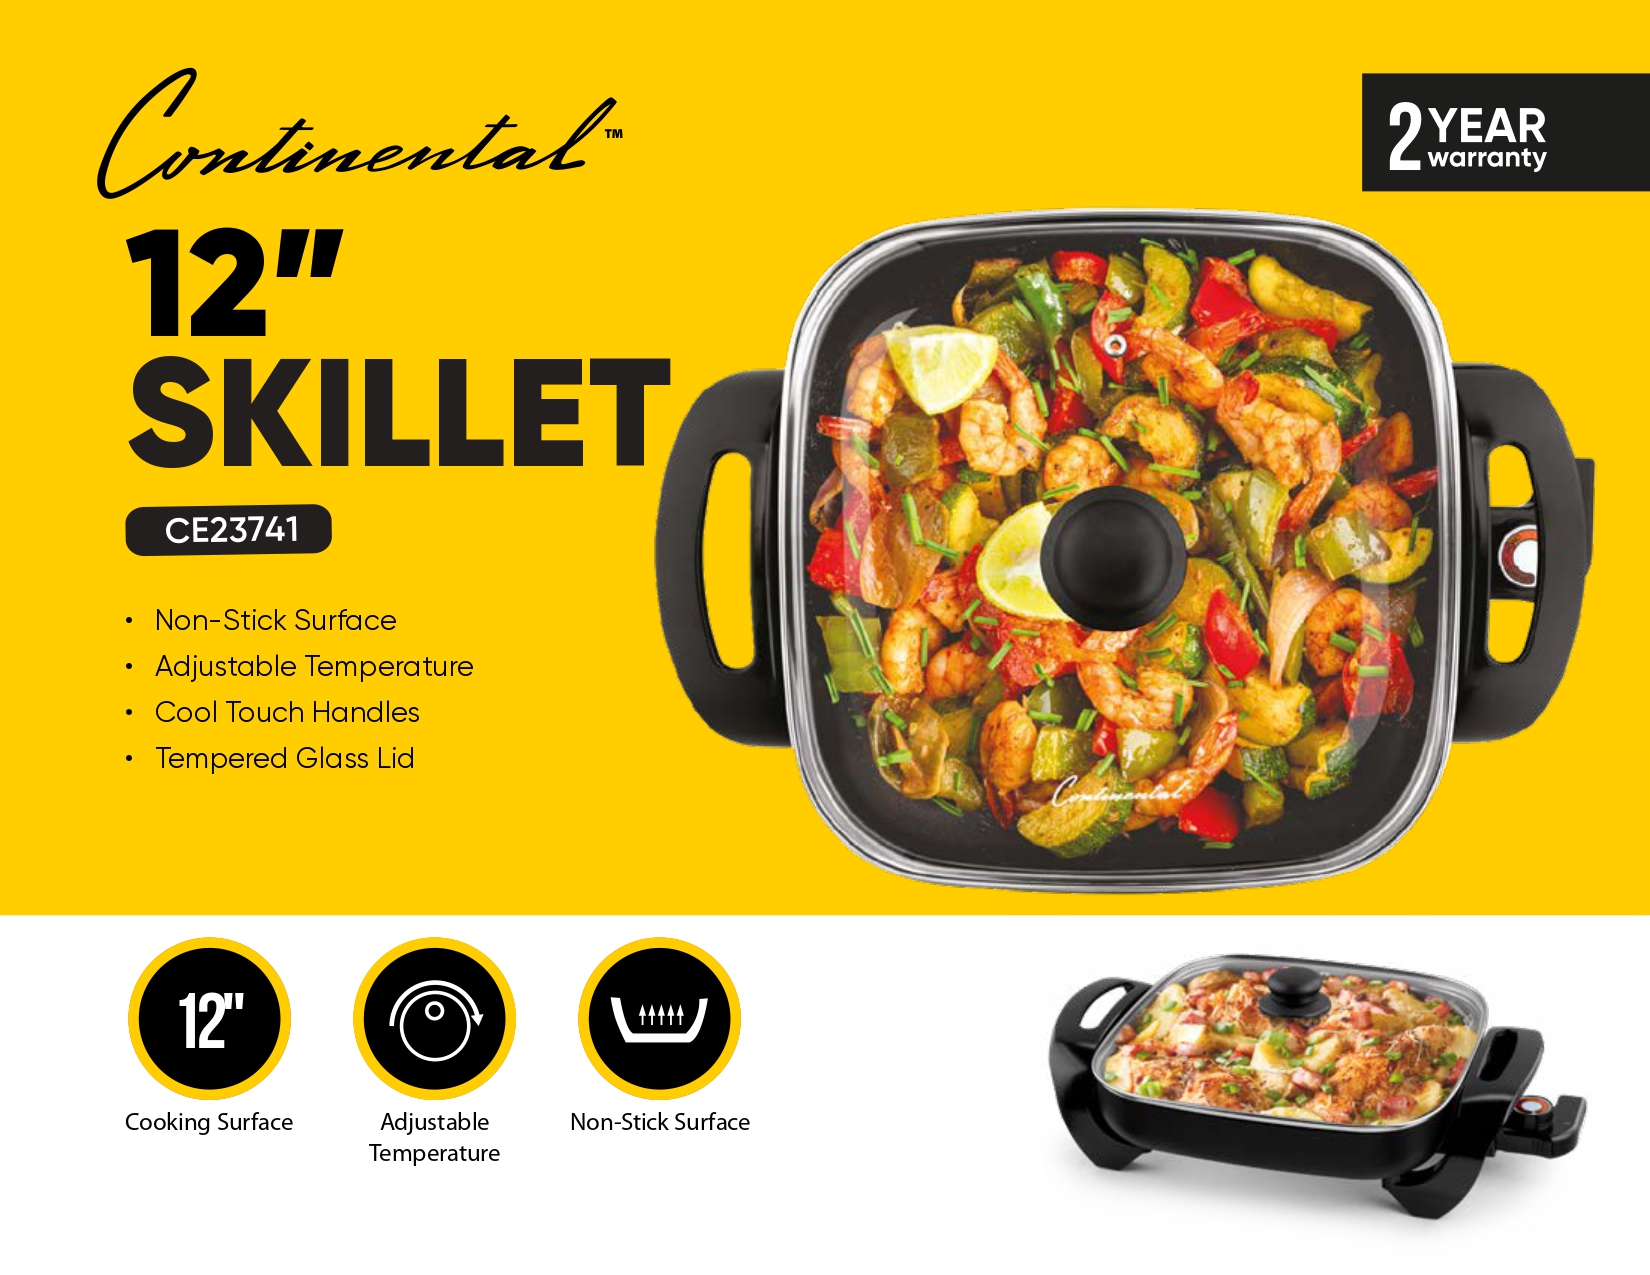 Skillet 12'' Cooking Surface